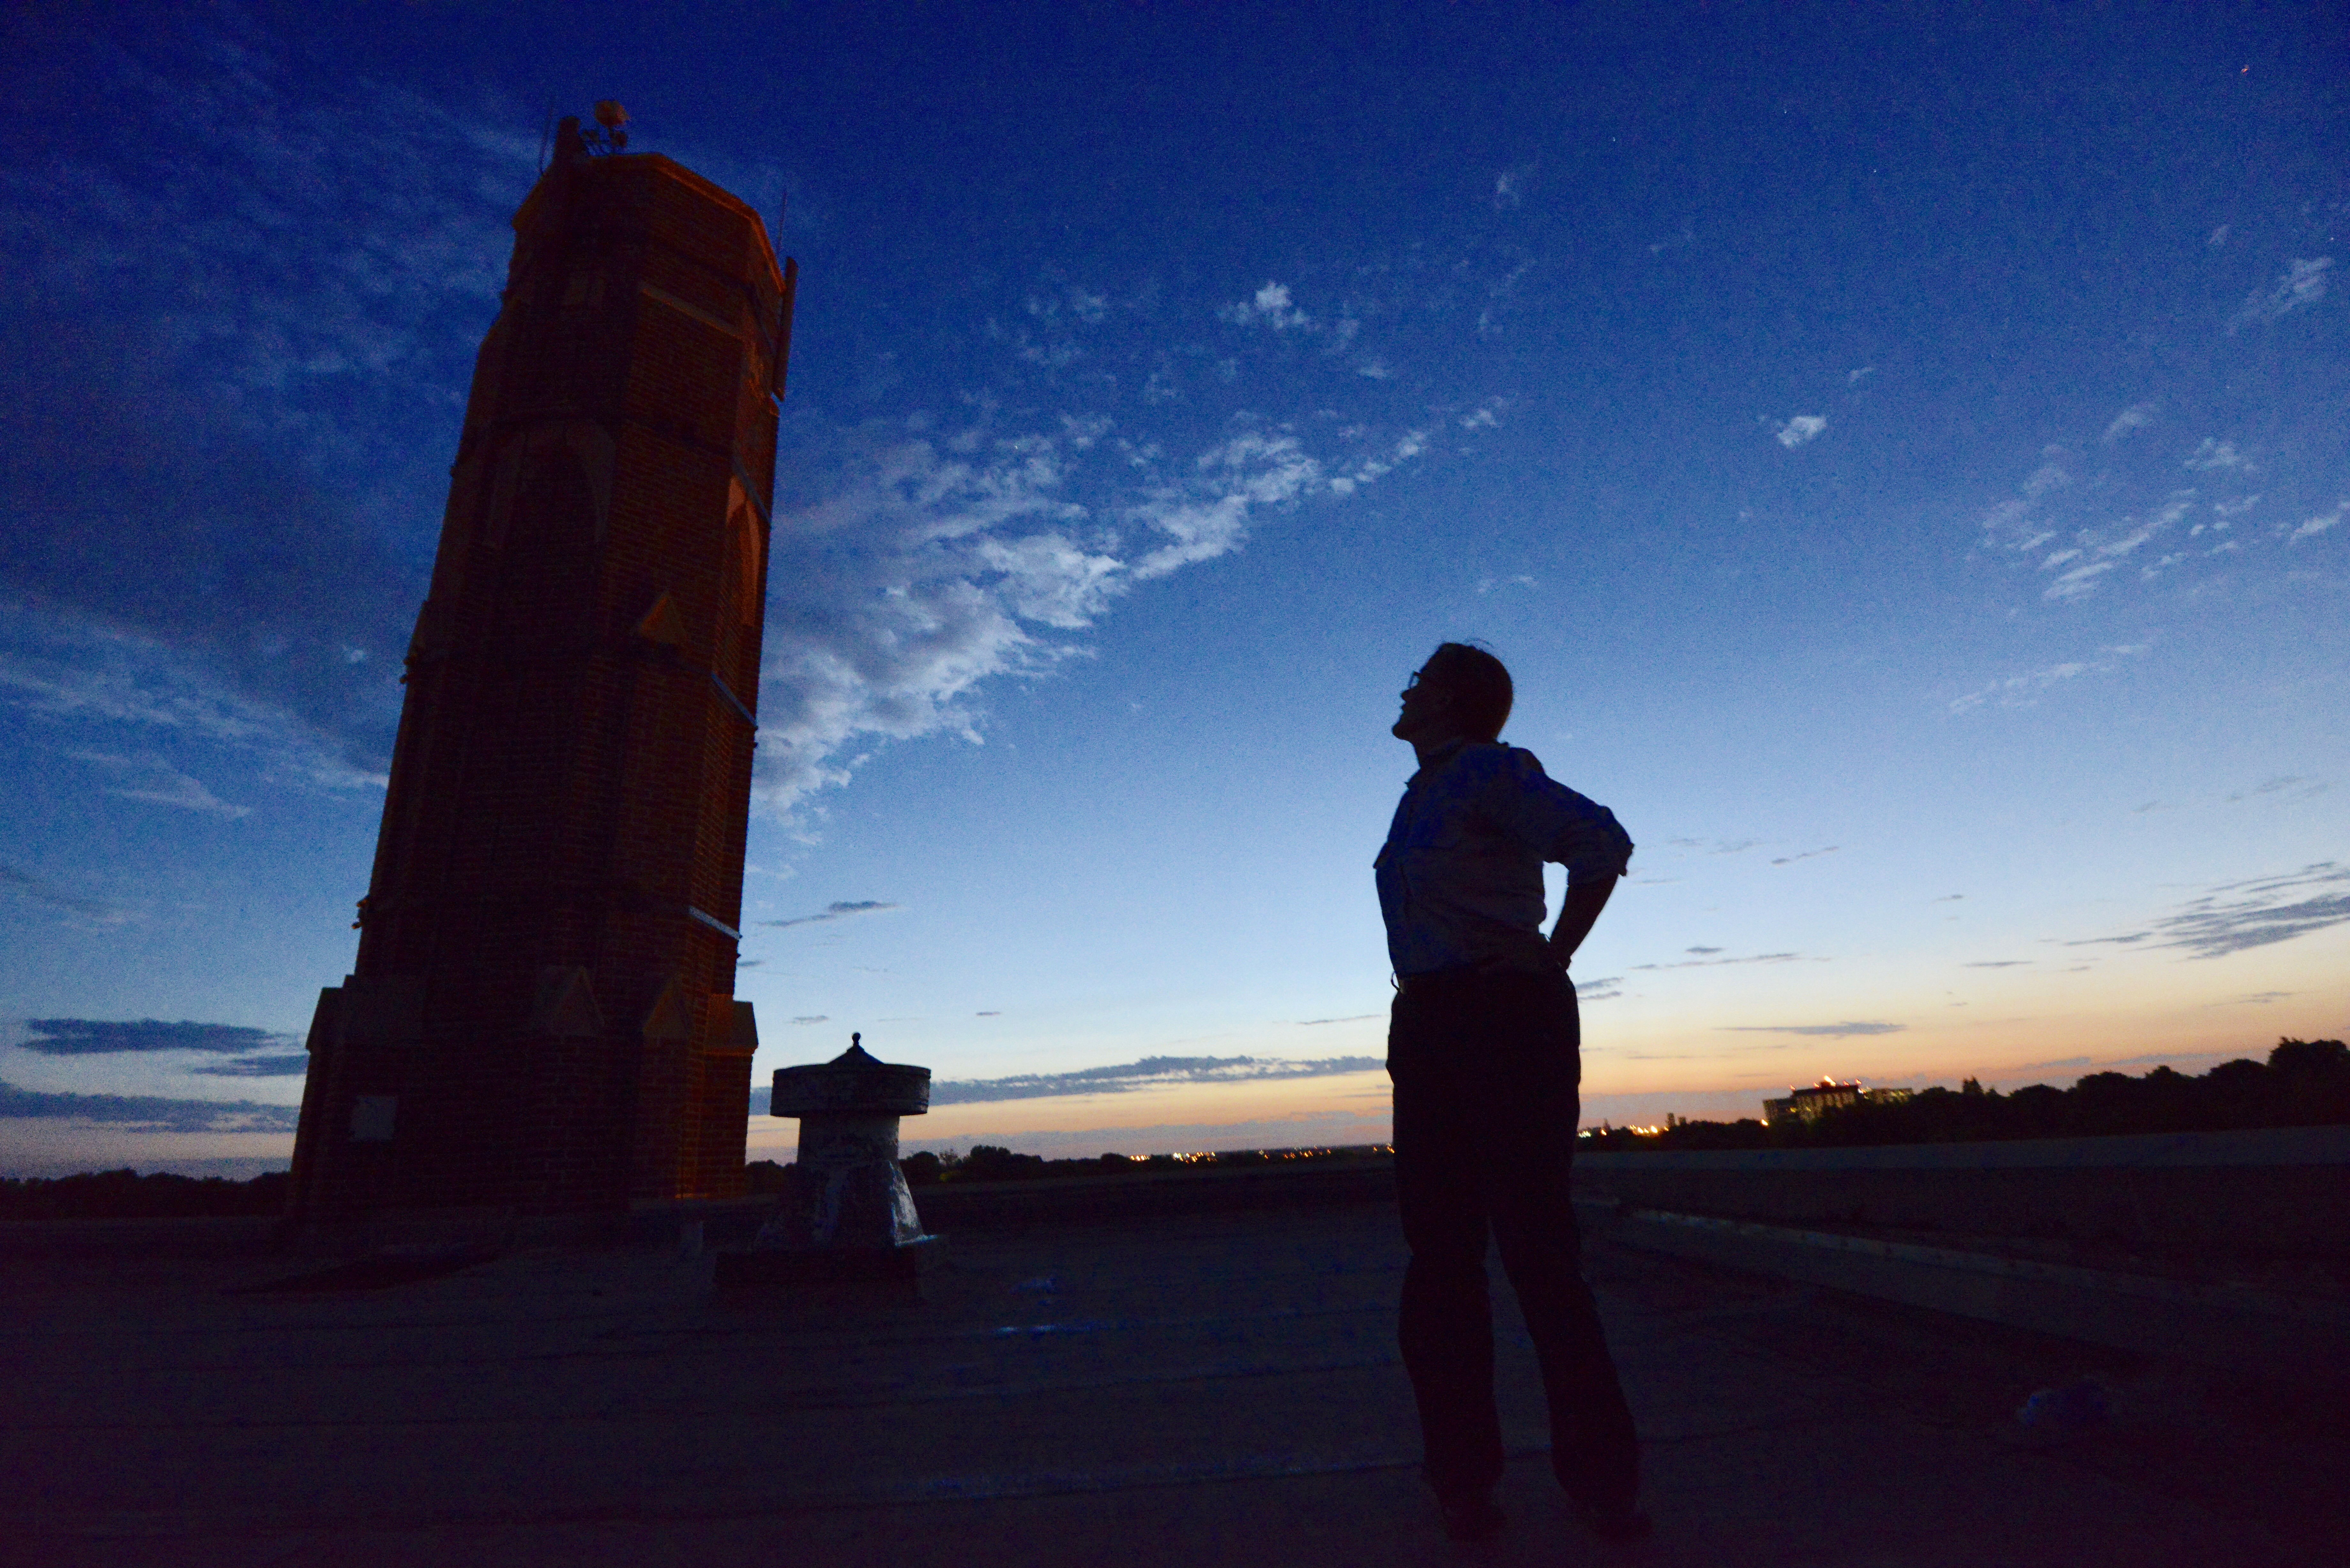 Mary Bomberger Brown at the Irving Middle School chimney where chimney swifts roost. | Image courtesy Michael Forsberg